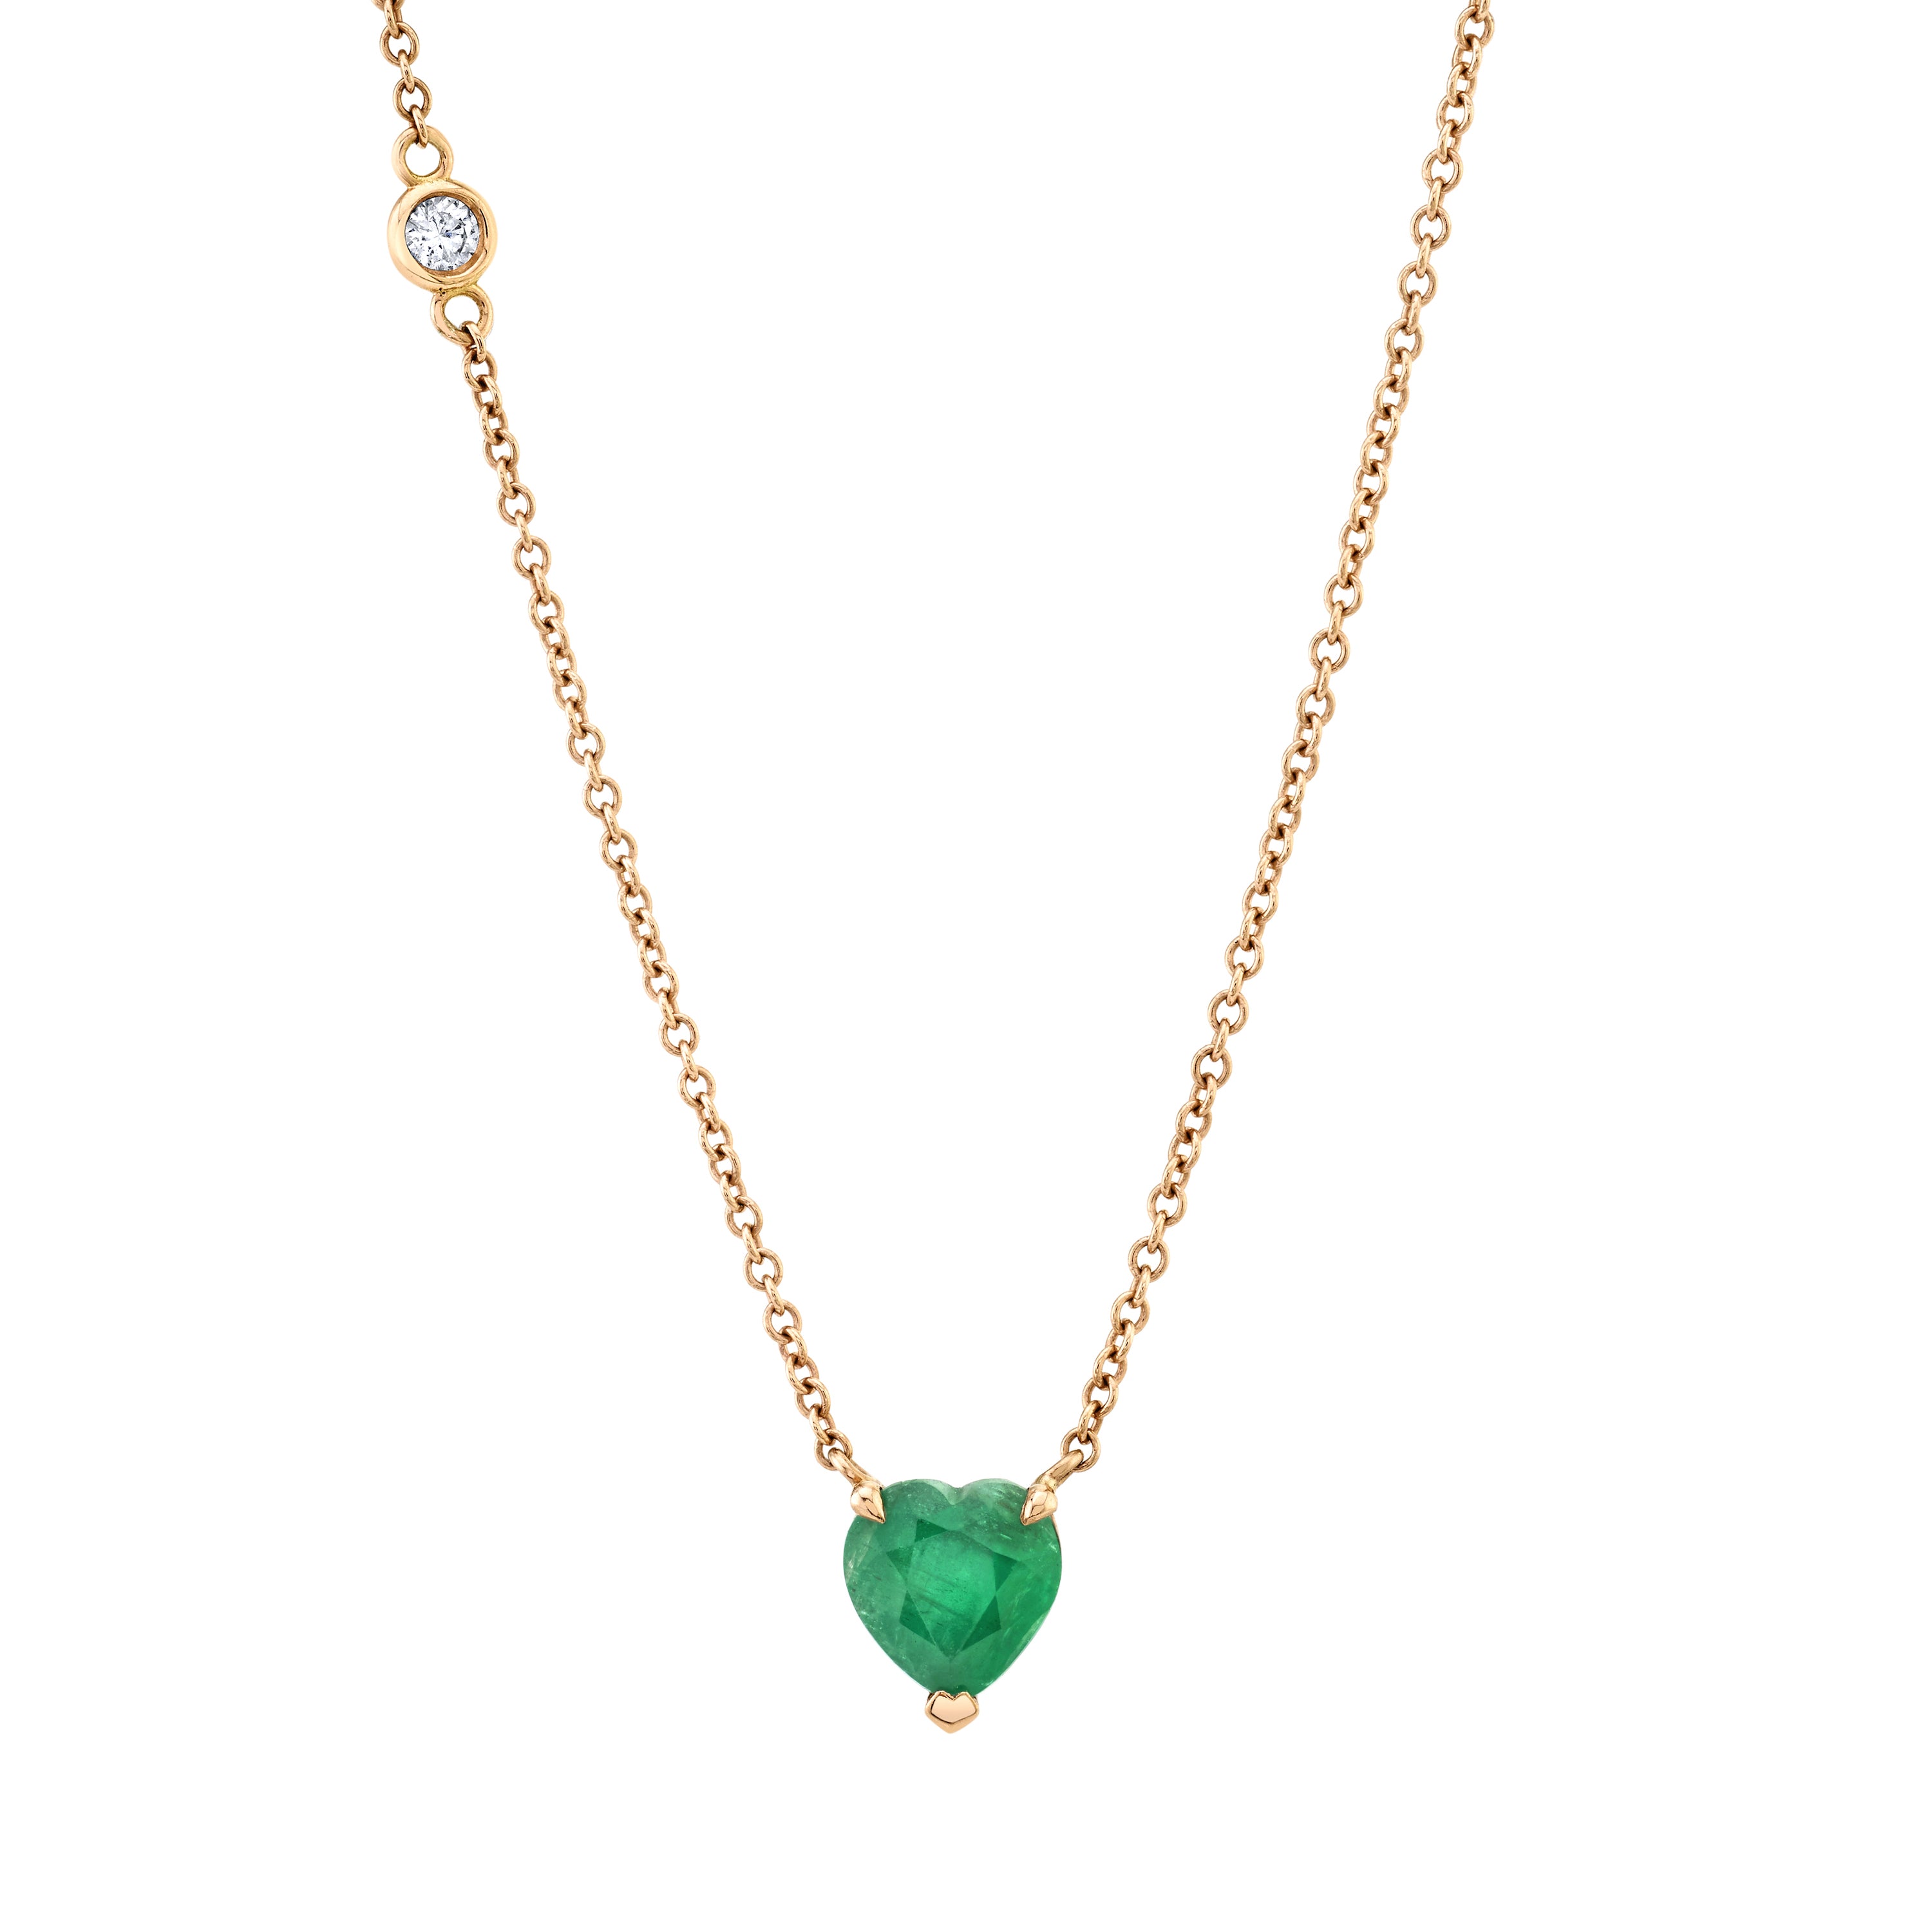 5.9ct Bezel Set Heart Cut Emerald Necklace With Link Chain | SayaBling  Jewelry